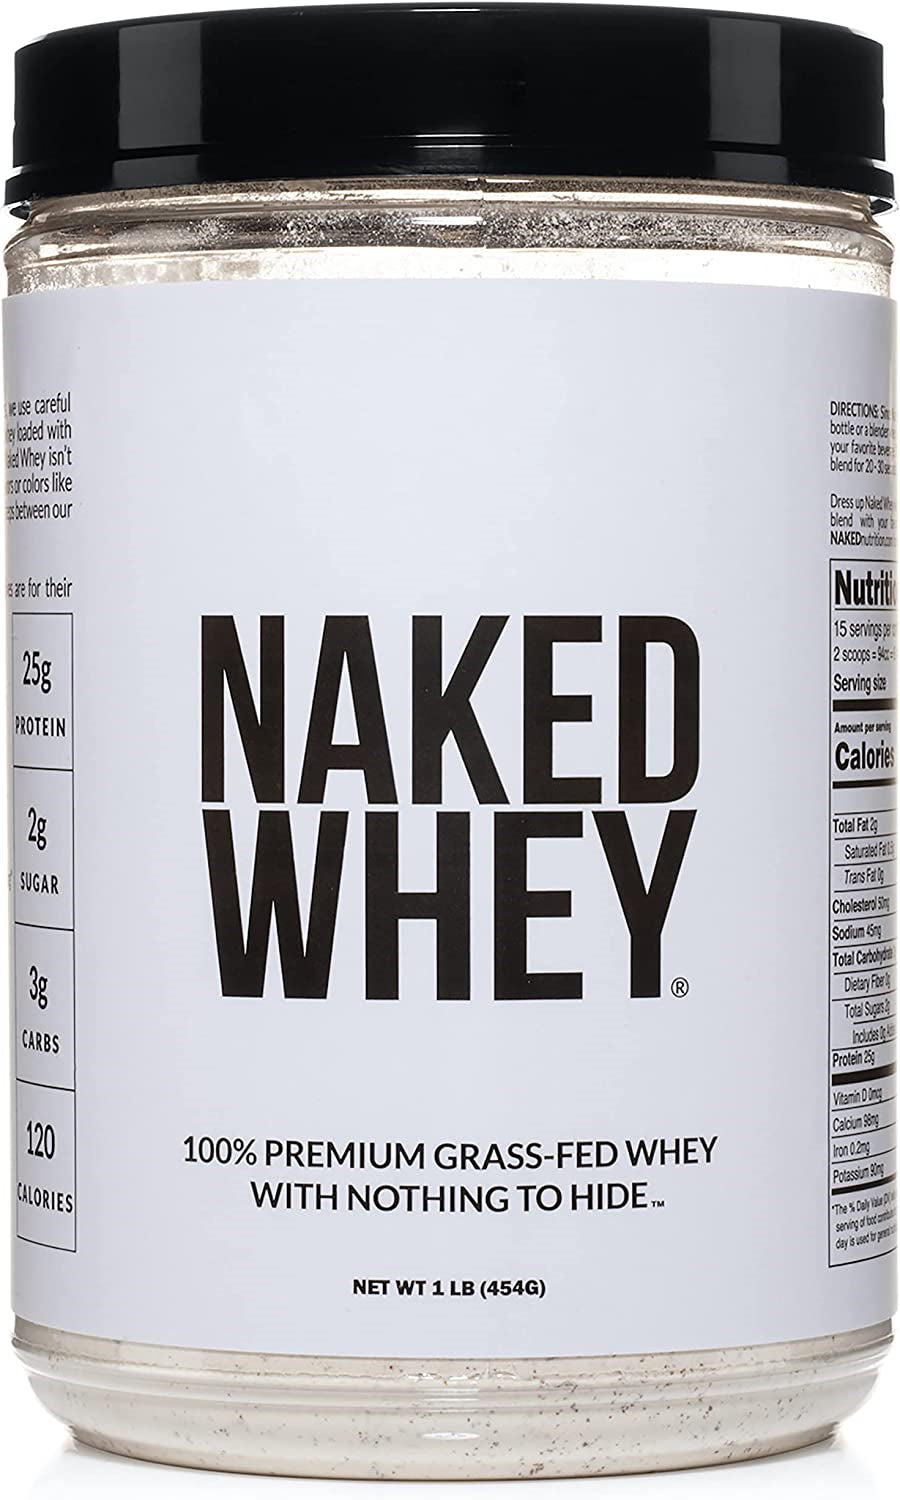 Naked WHEY 1LB 100% Grass Fed Unflavored Whey Protein Powder - US Farms Only...